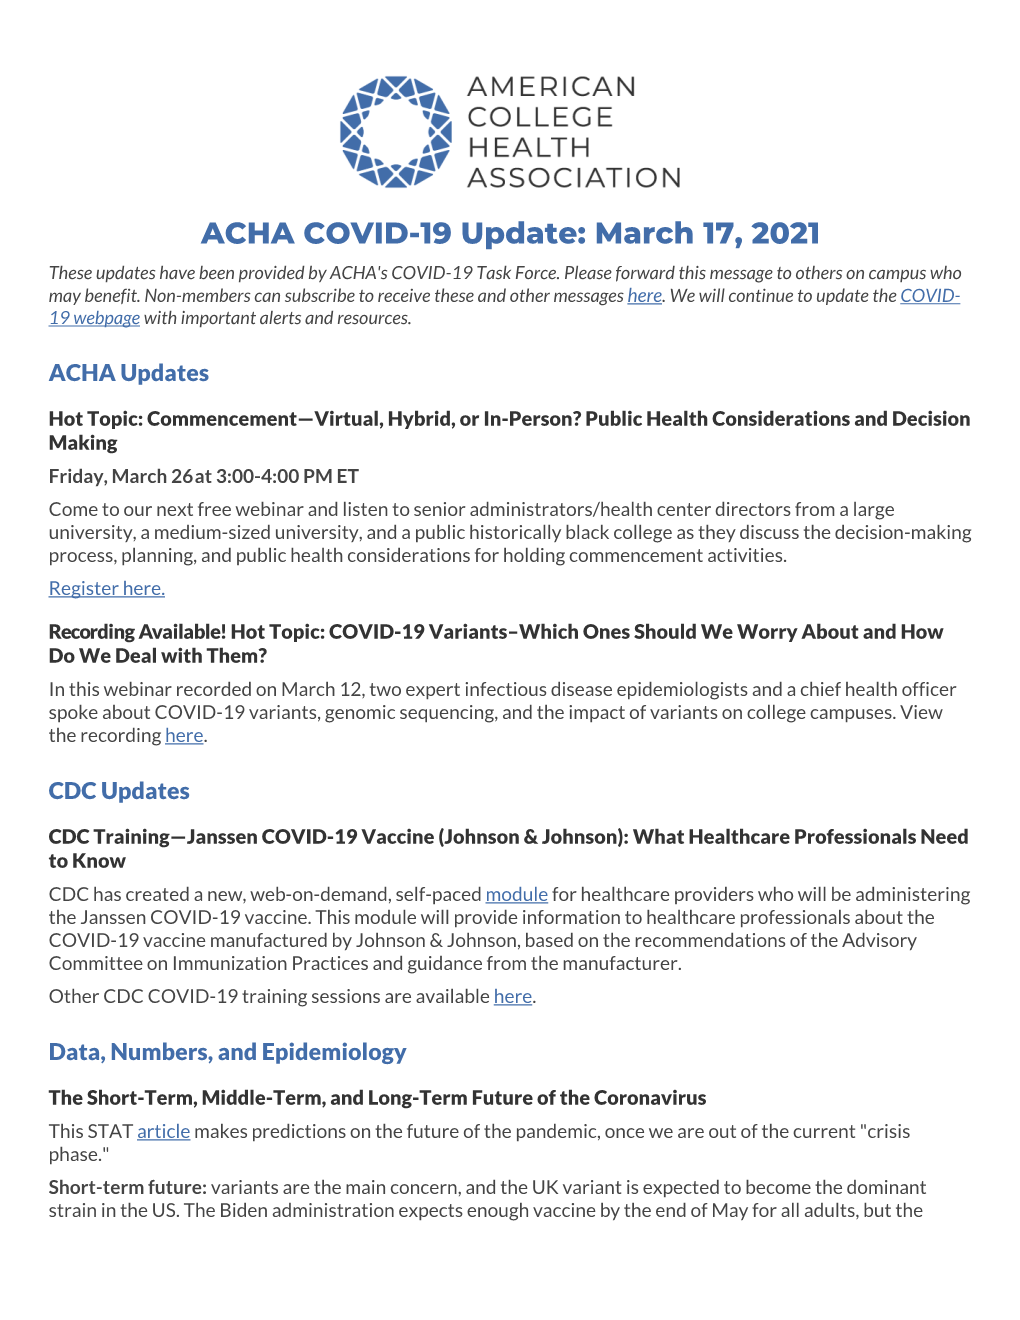 March 17, 2021 These Updates Have Been Provided by ACHA's COVID-19 Task Force